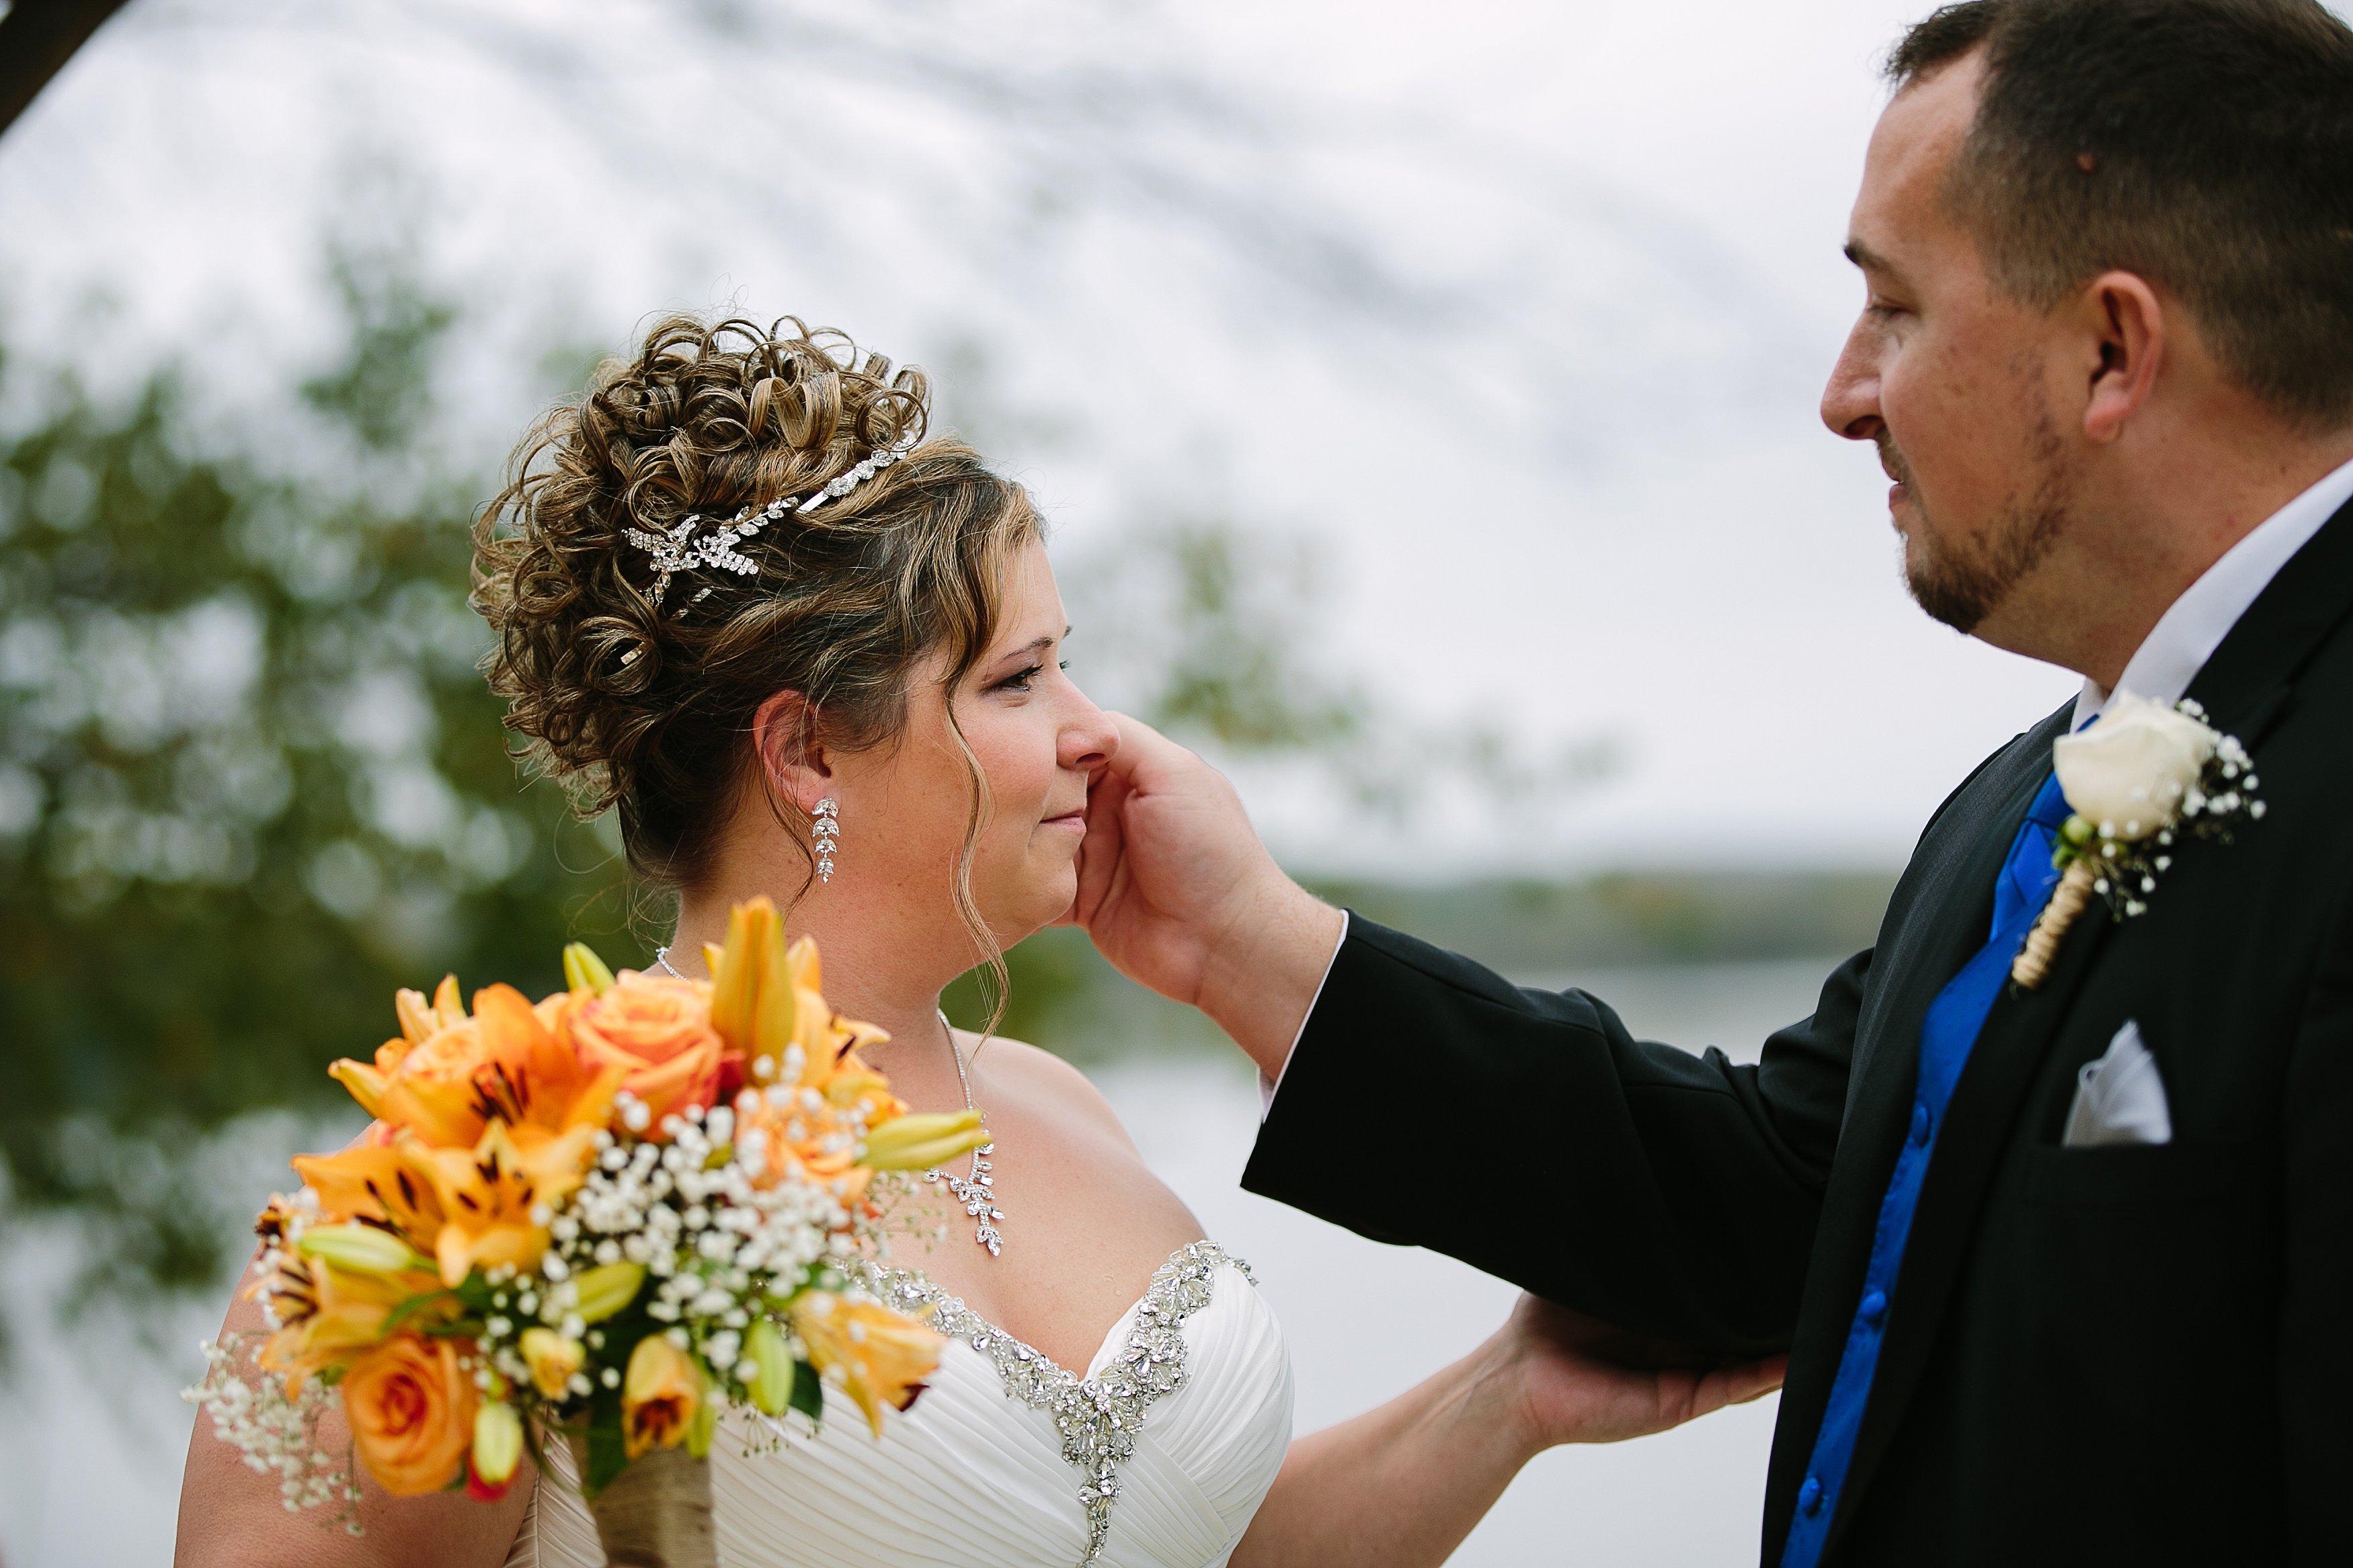 emotional moment between a bride and groom at iowa outdoor wedding wedding, catherine furlin photography